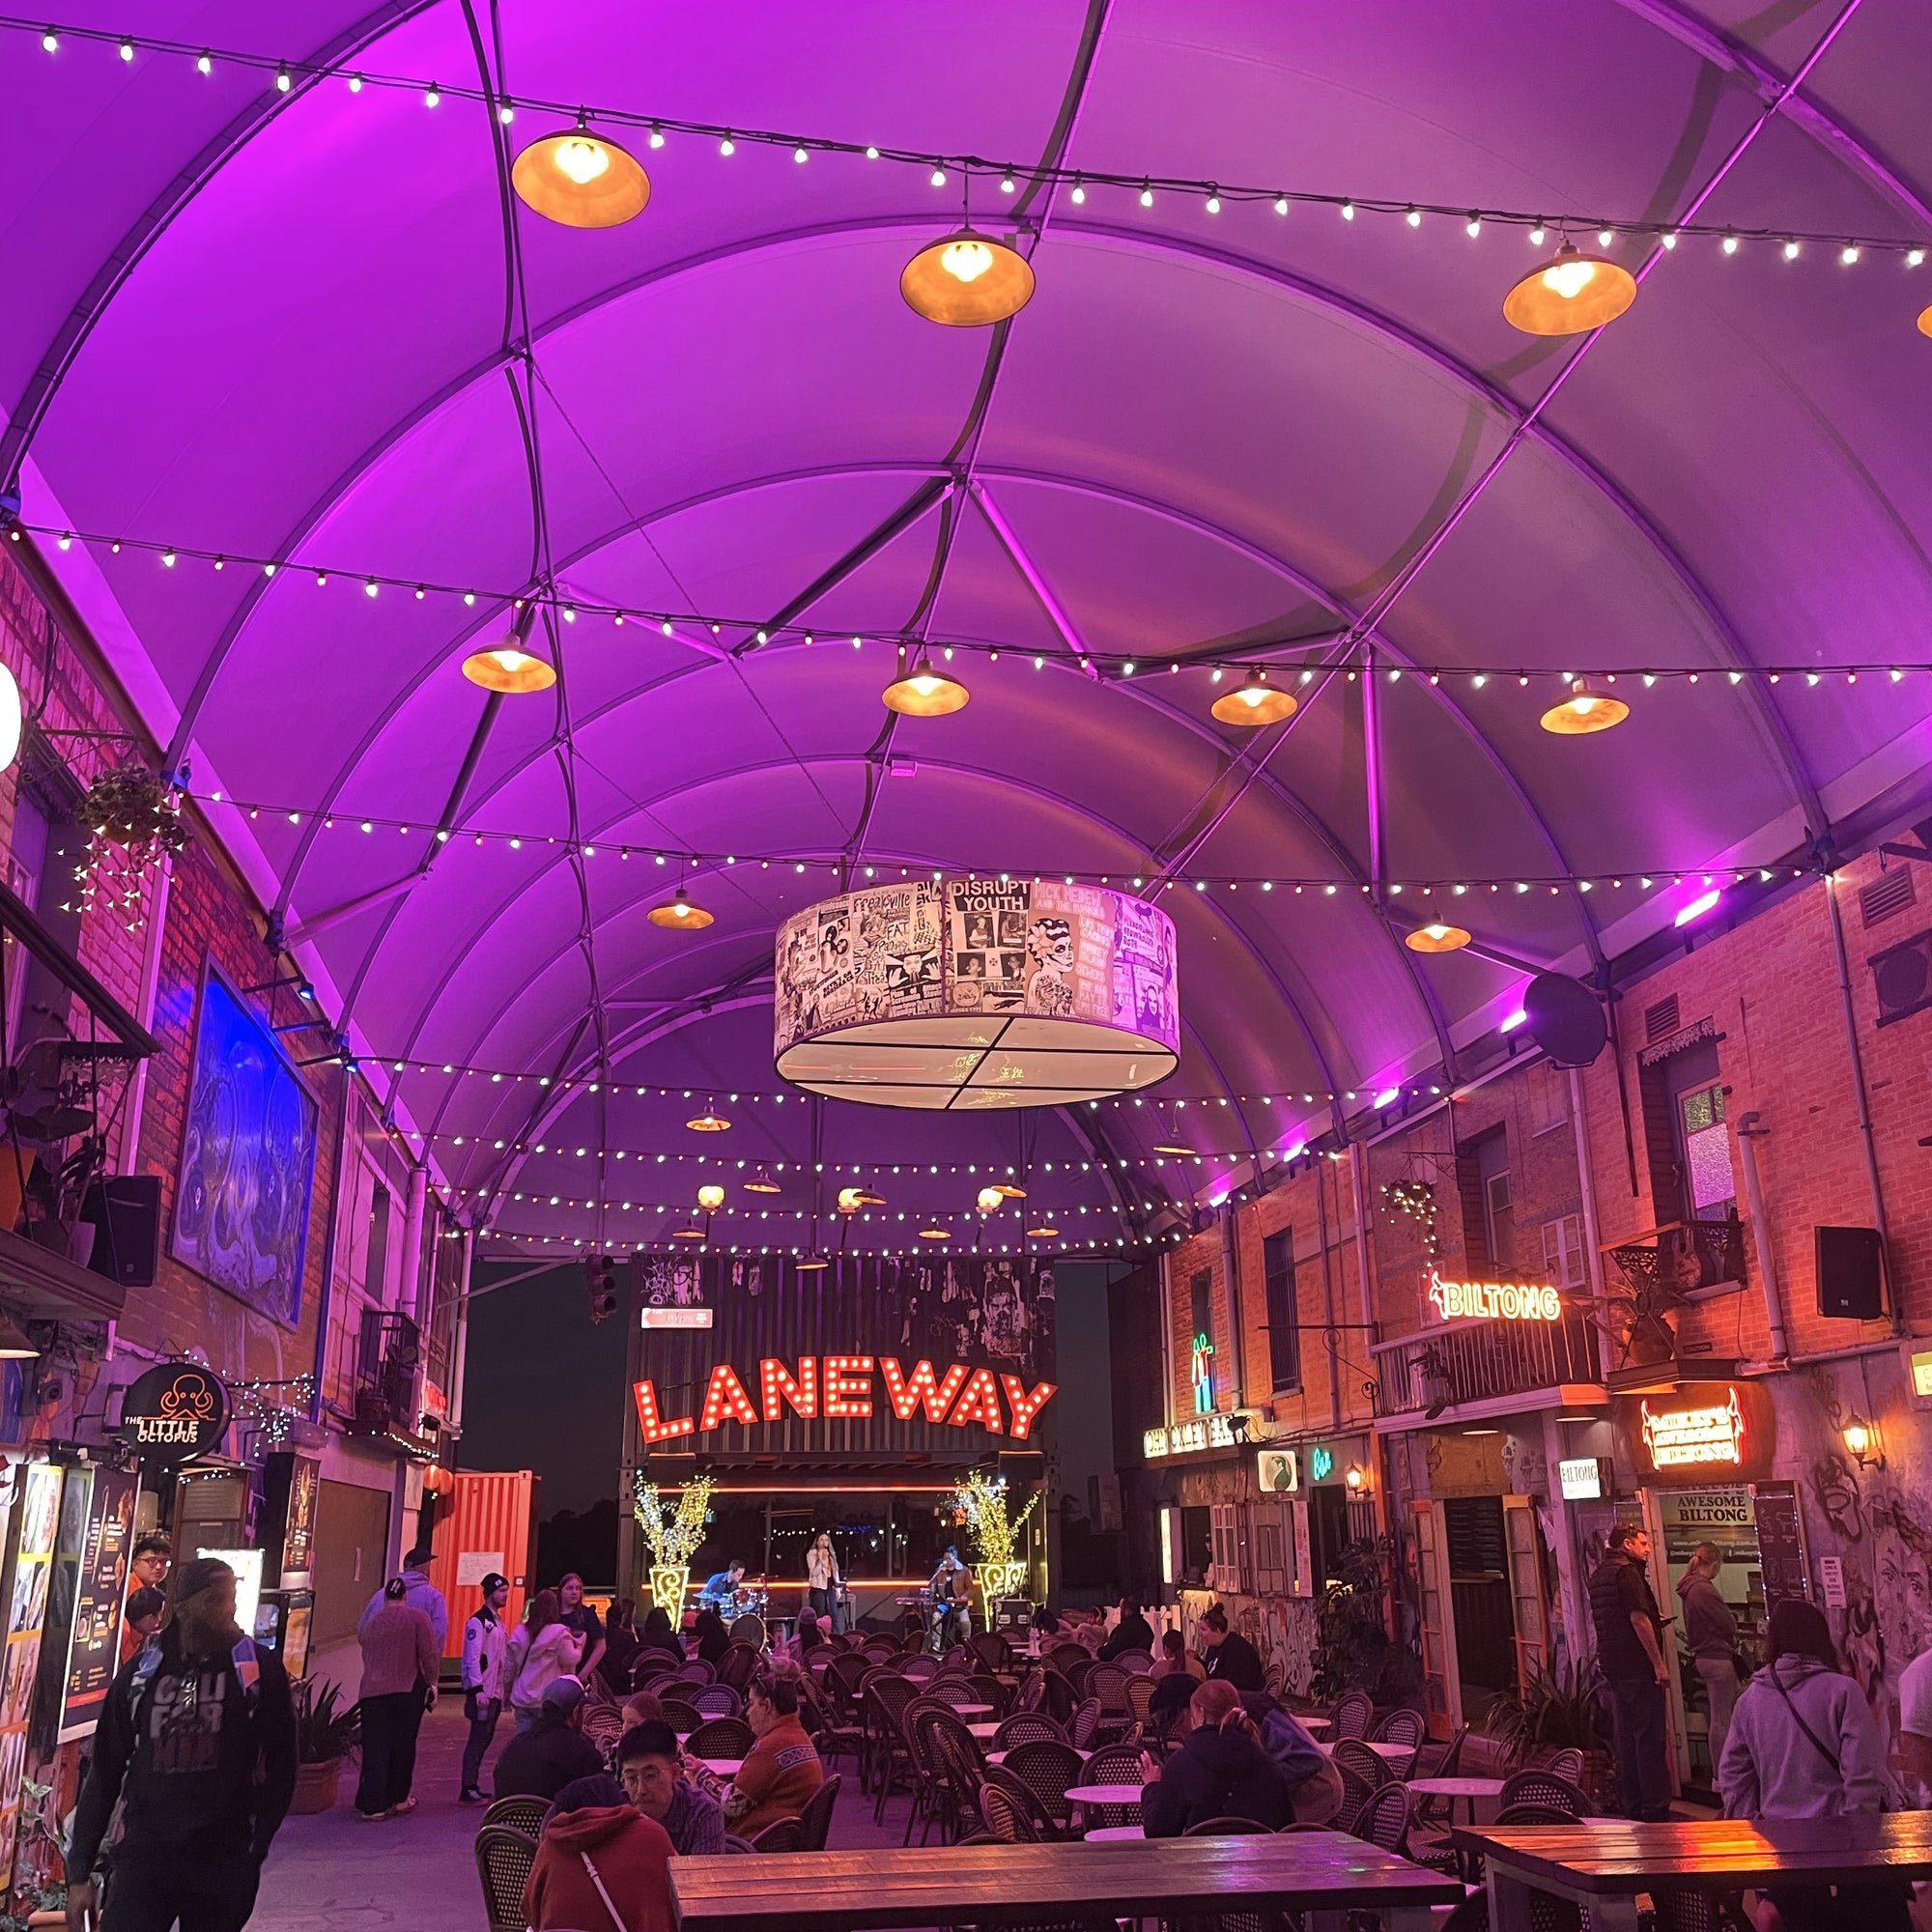 Why Hire Festoon Lighting for Your Next Event?